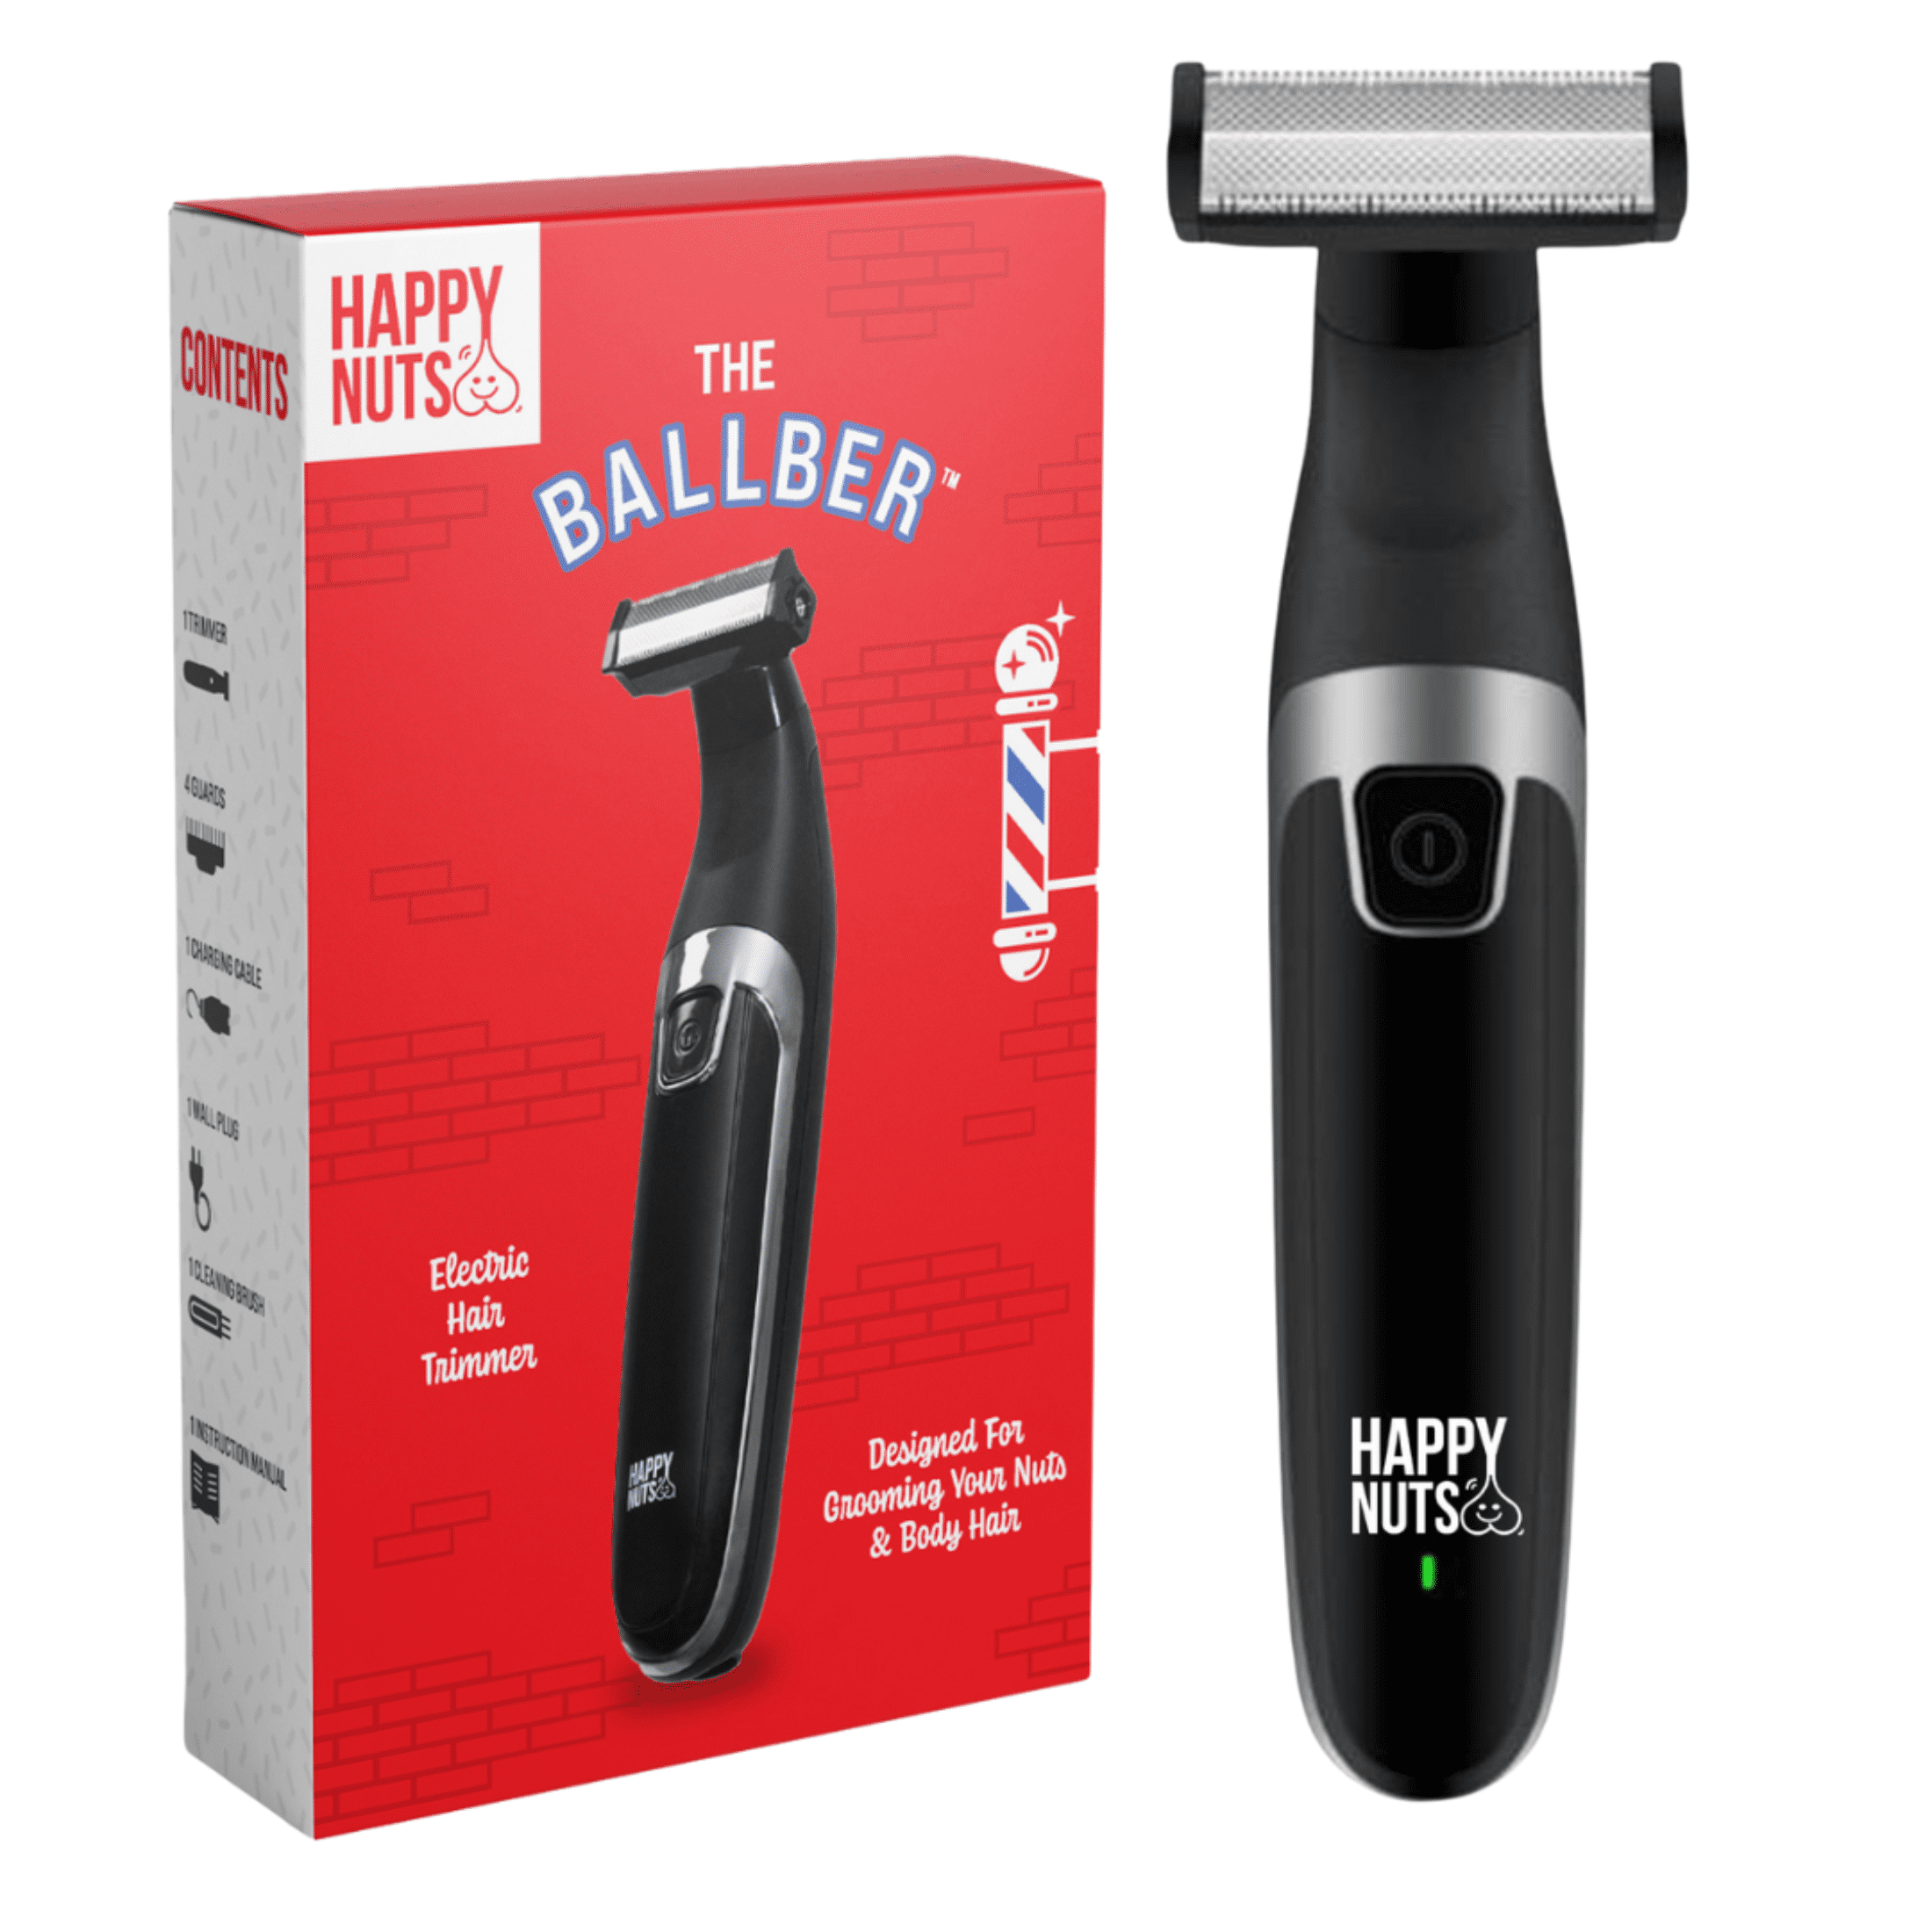 The Ballber, Groin Hair Trimmer, Waterproof Rechargeable Electric Hair Shaver for Men - Walmart.com